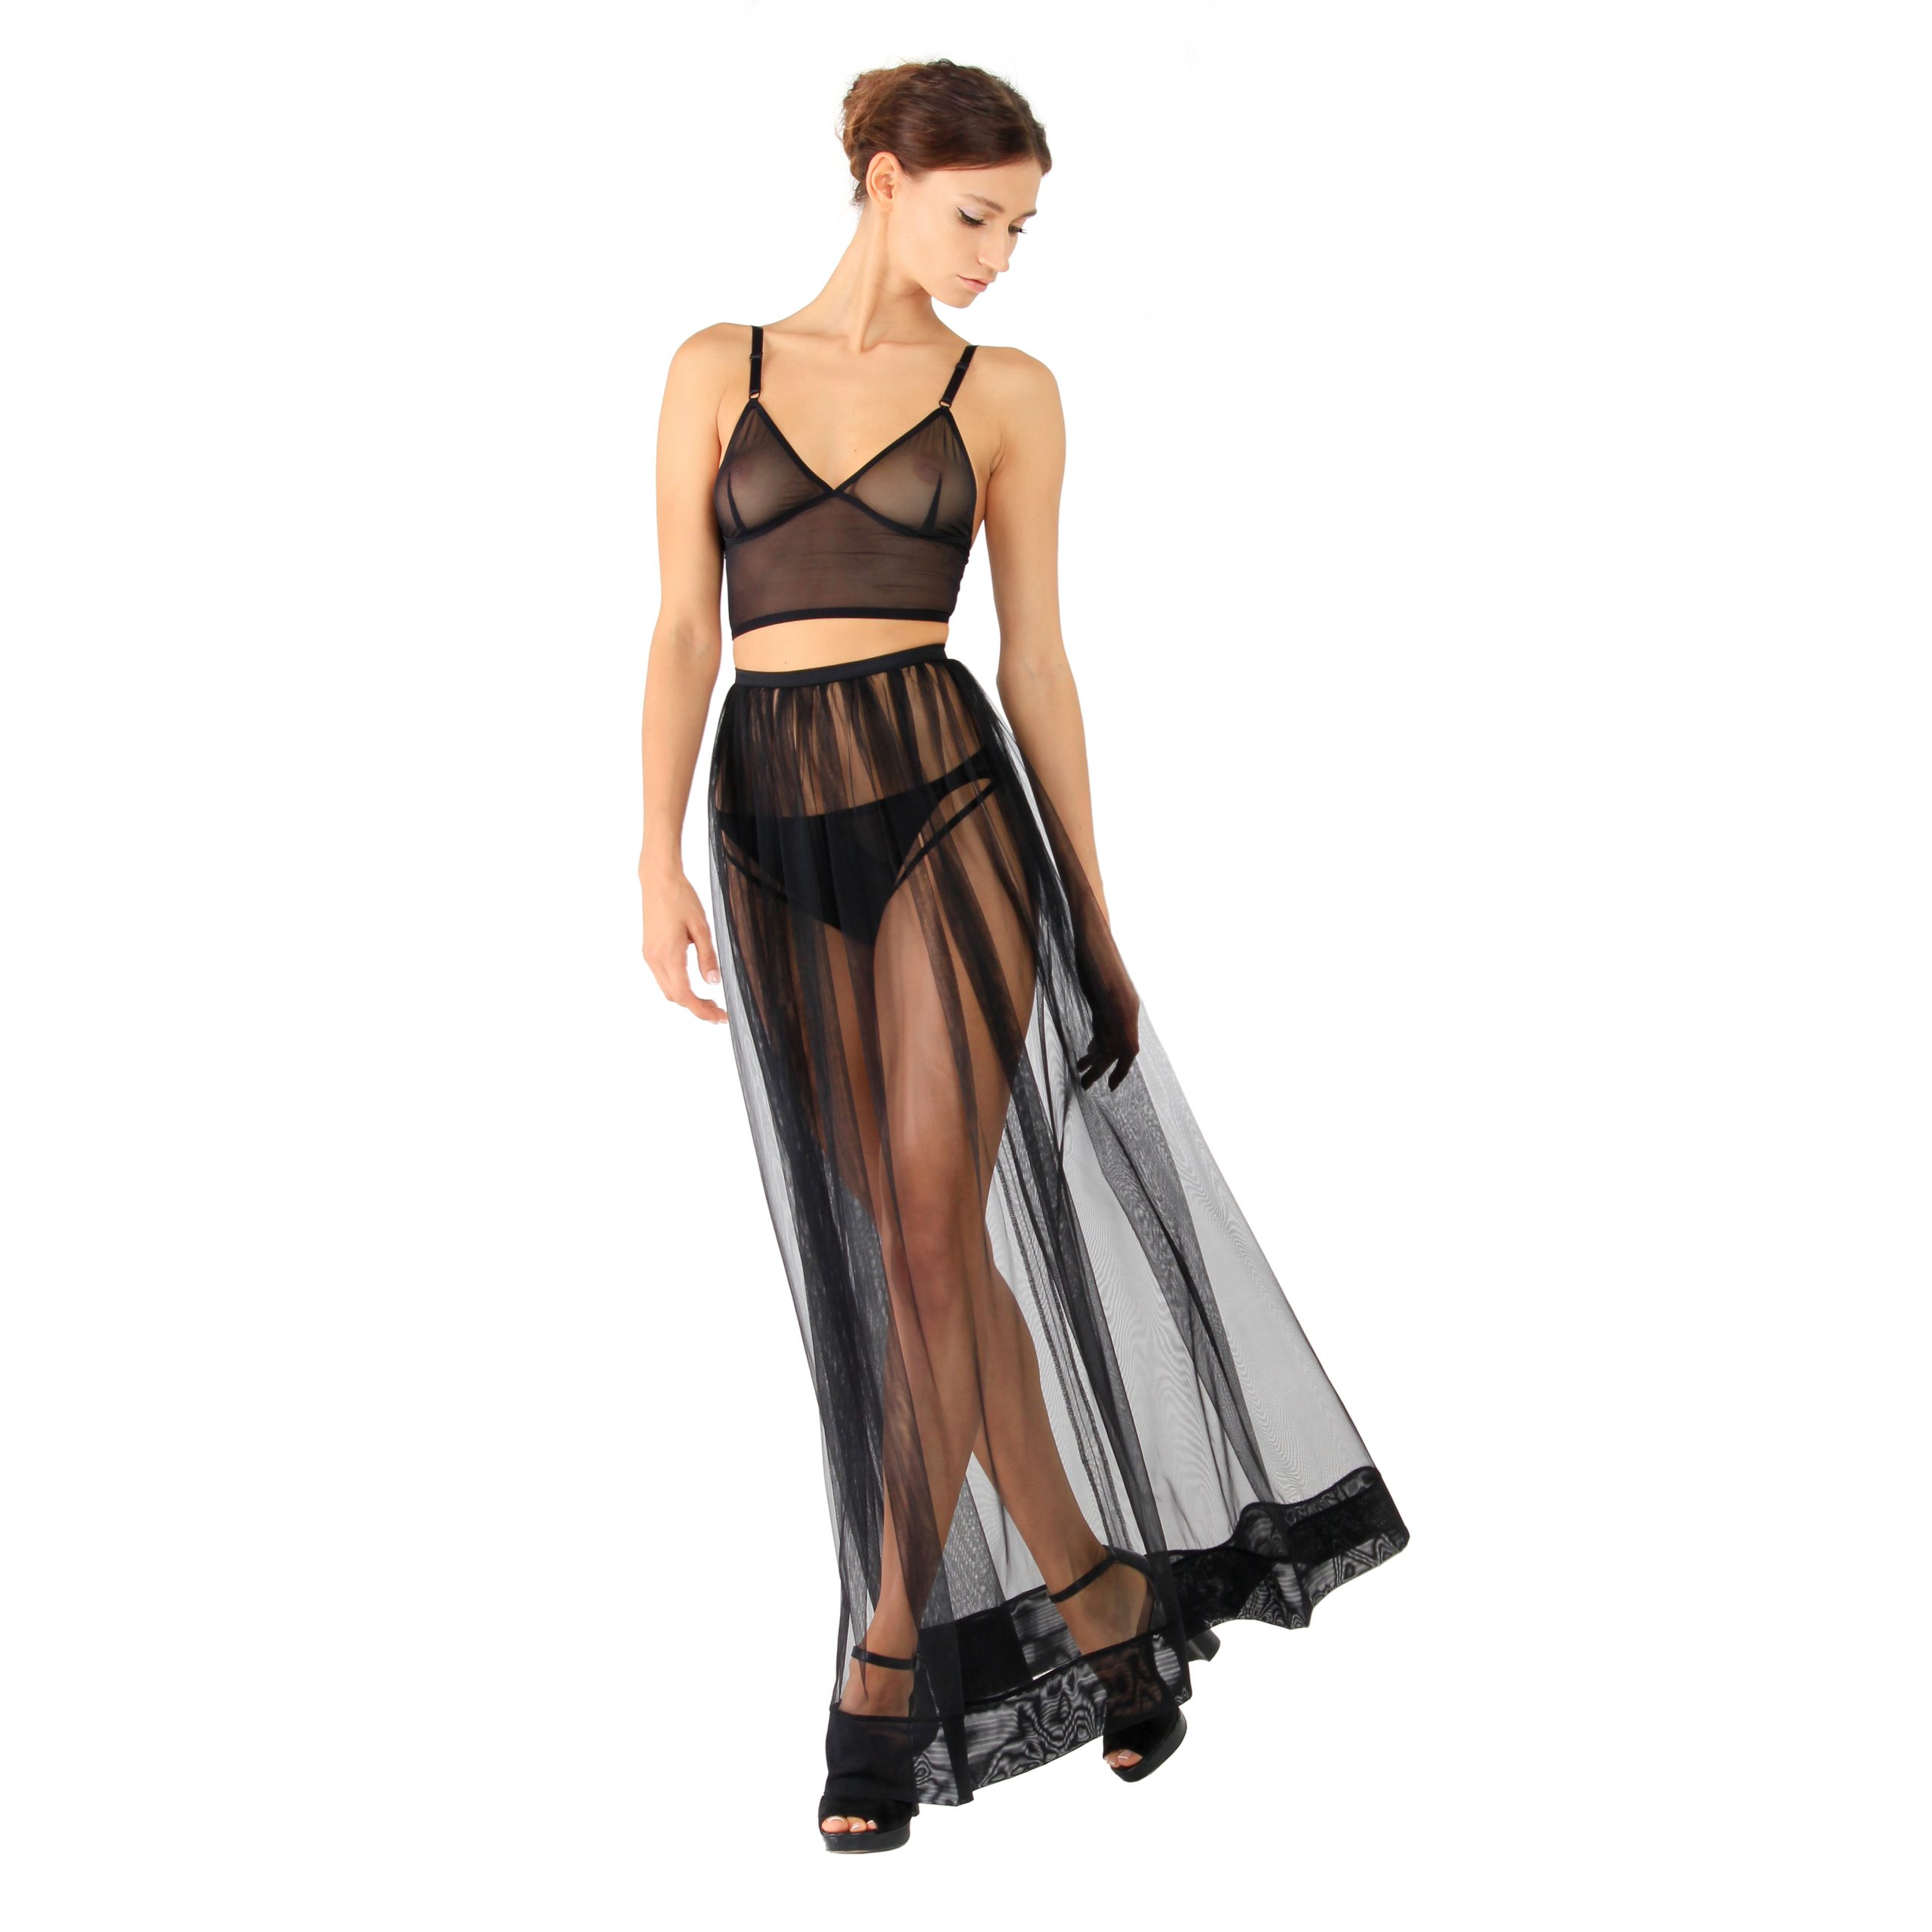 Sheer Black Mesh Long Skirt By Flash You And Me Lingerie